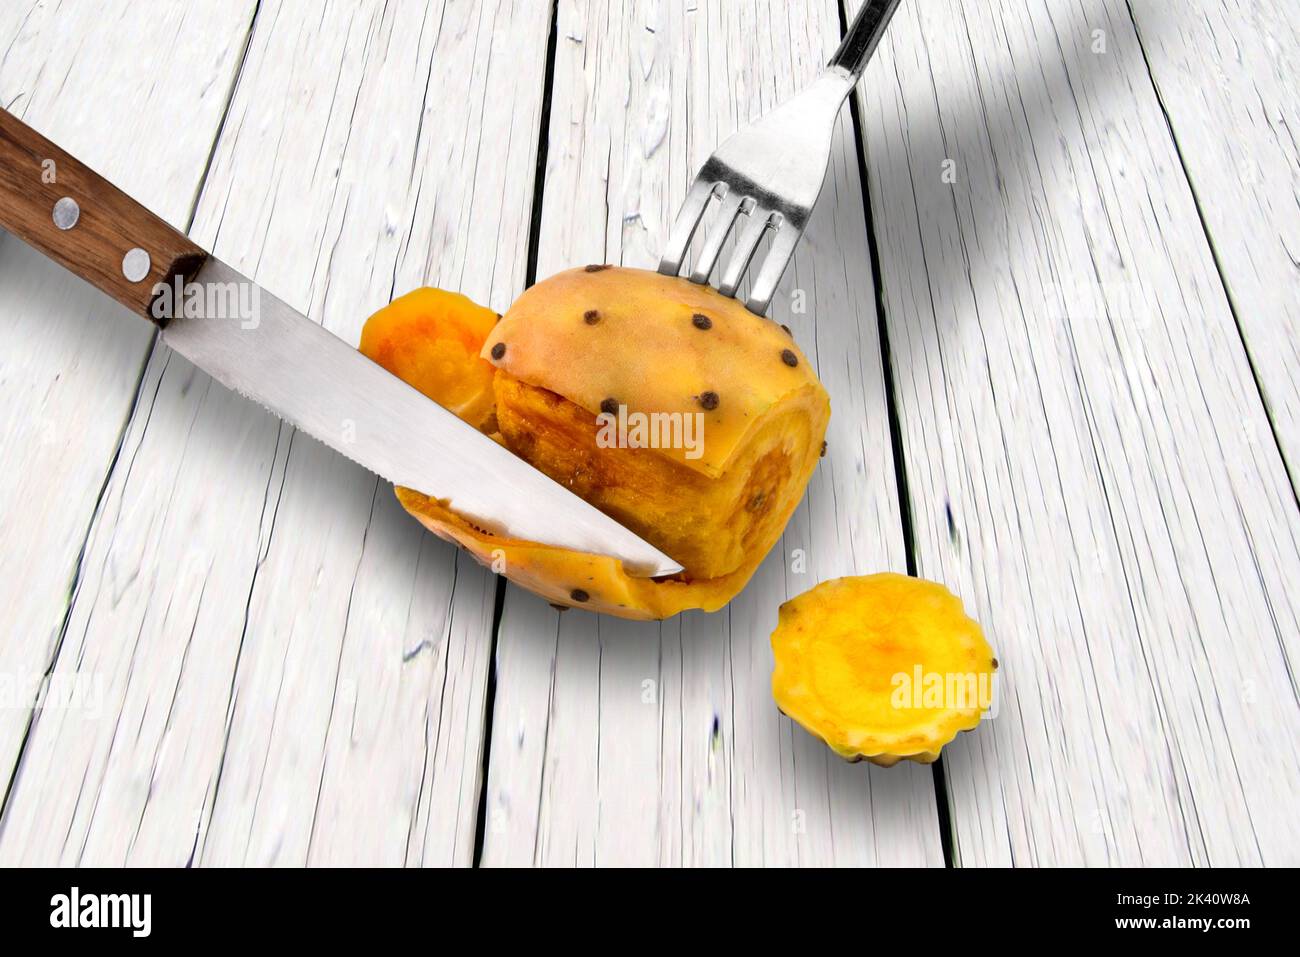 Peel prickly pears with fork and knife on white wooden table Stock Photo